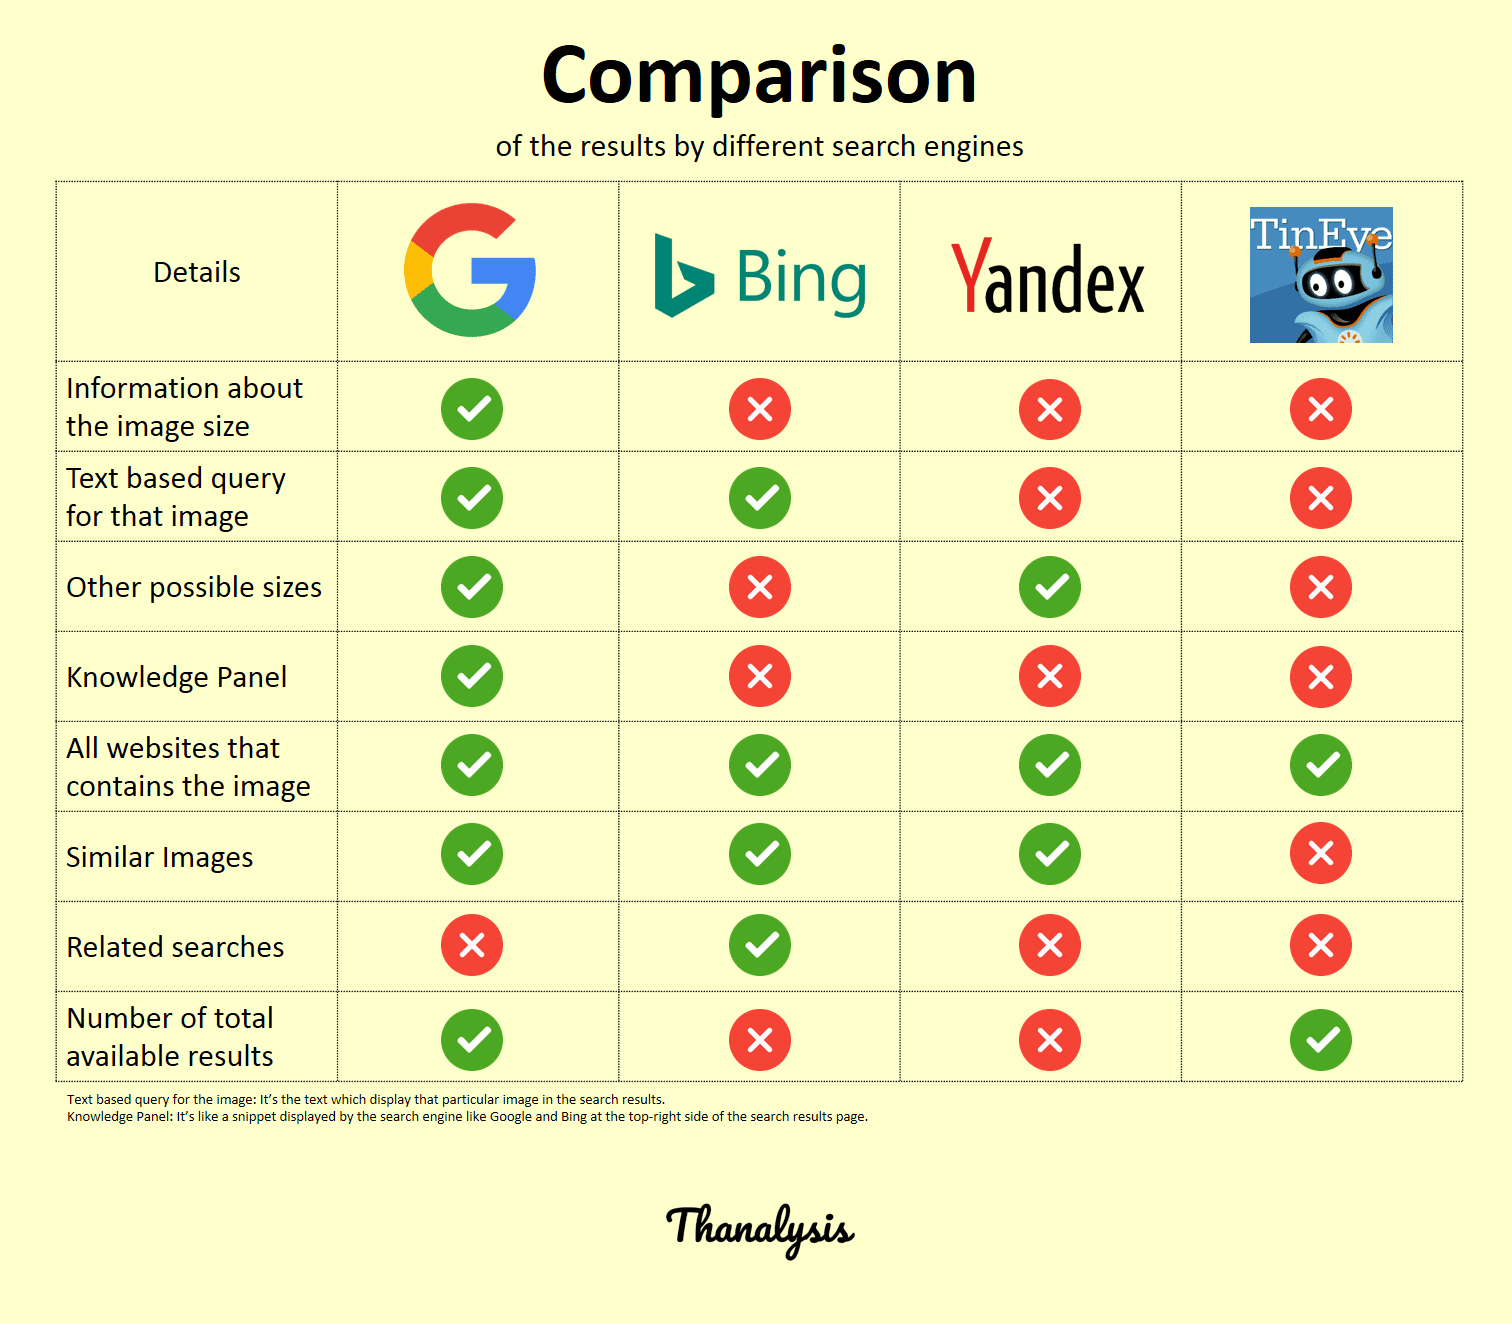 Comparison of the reverse image search results provided by Google, Bing, Yandex, and TinEye